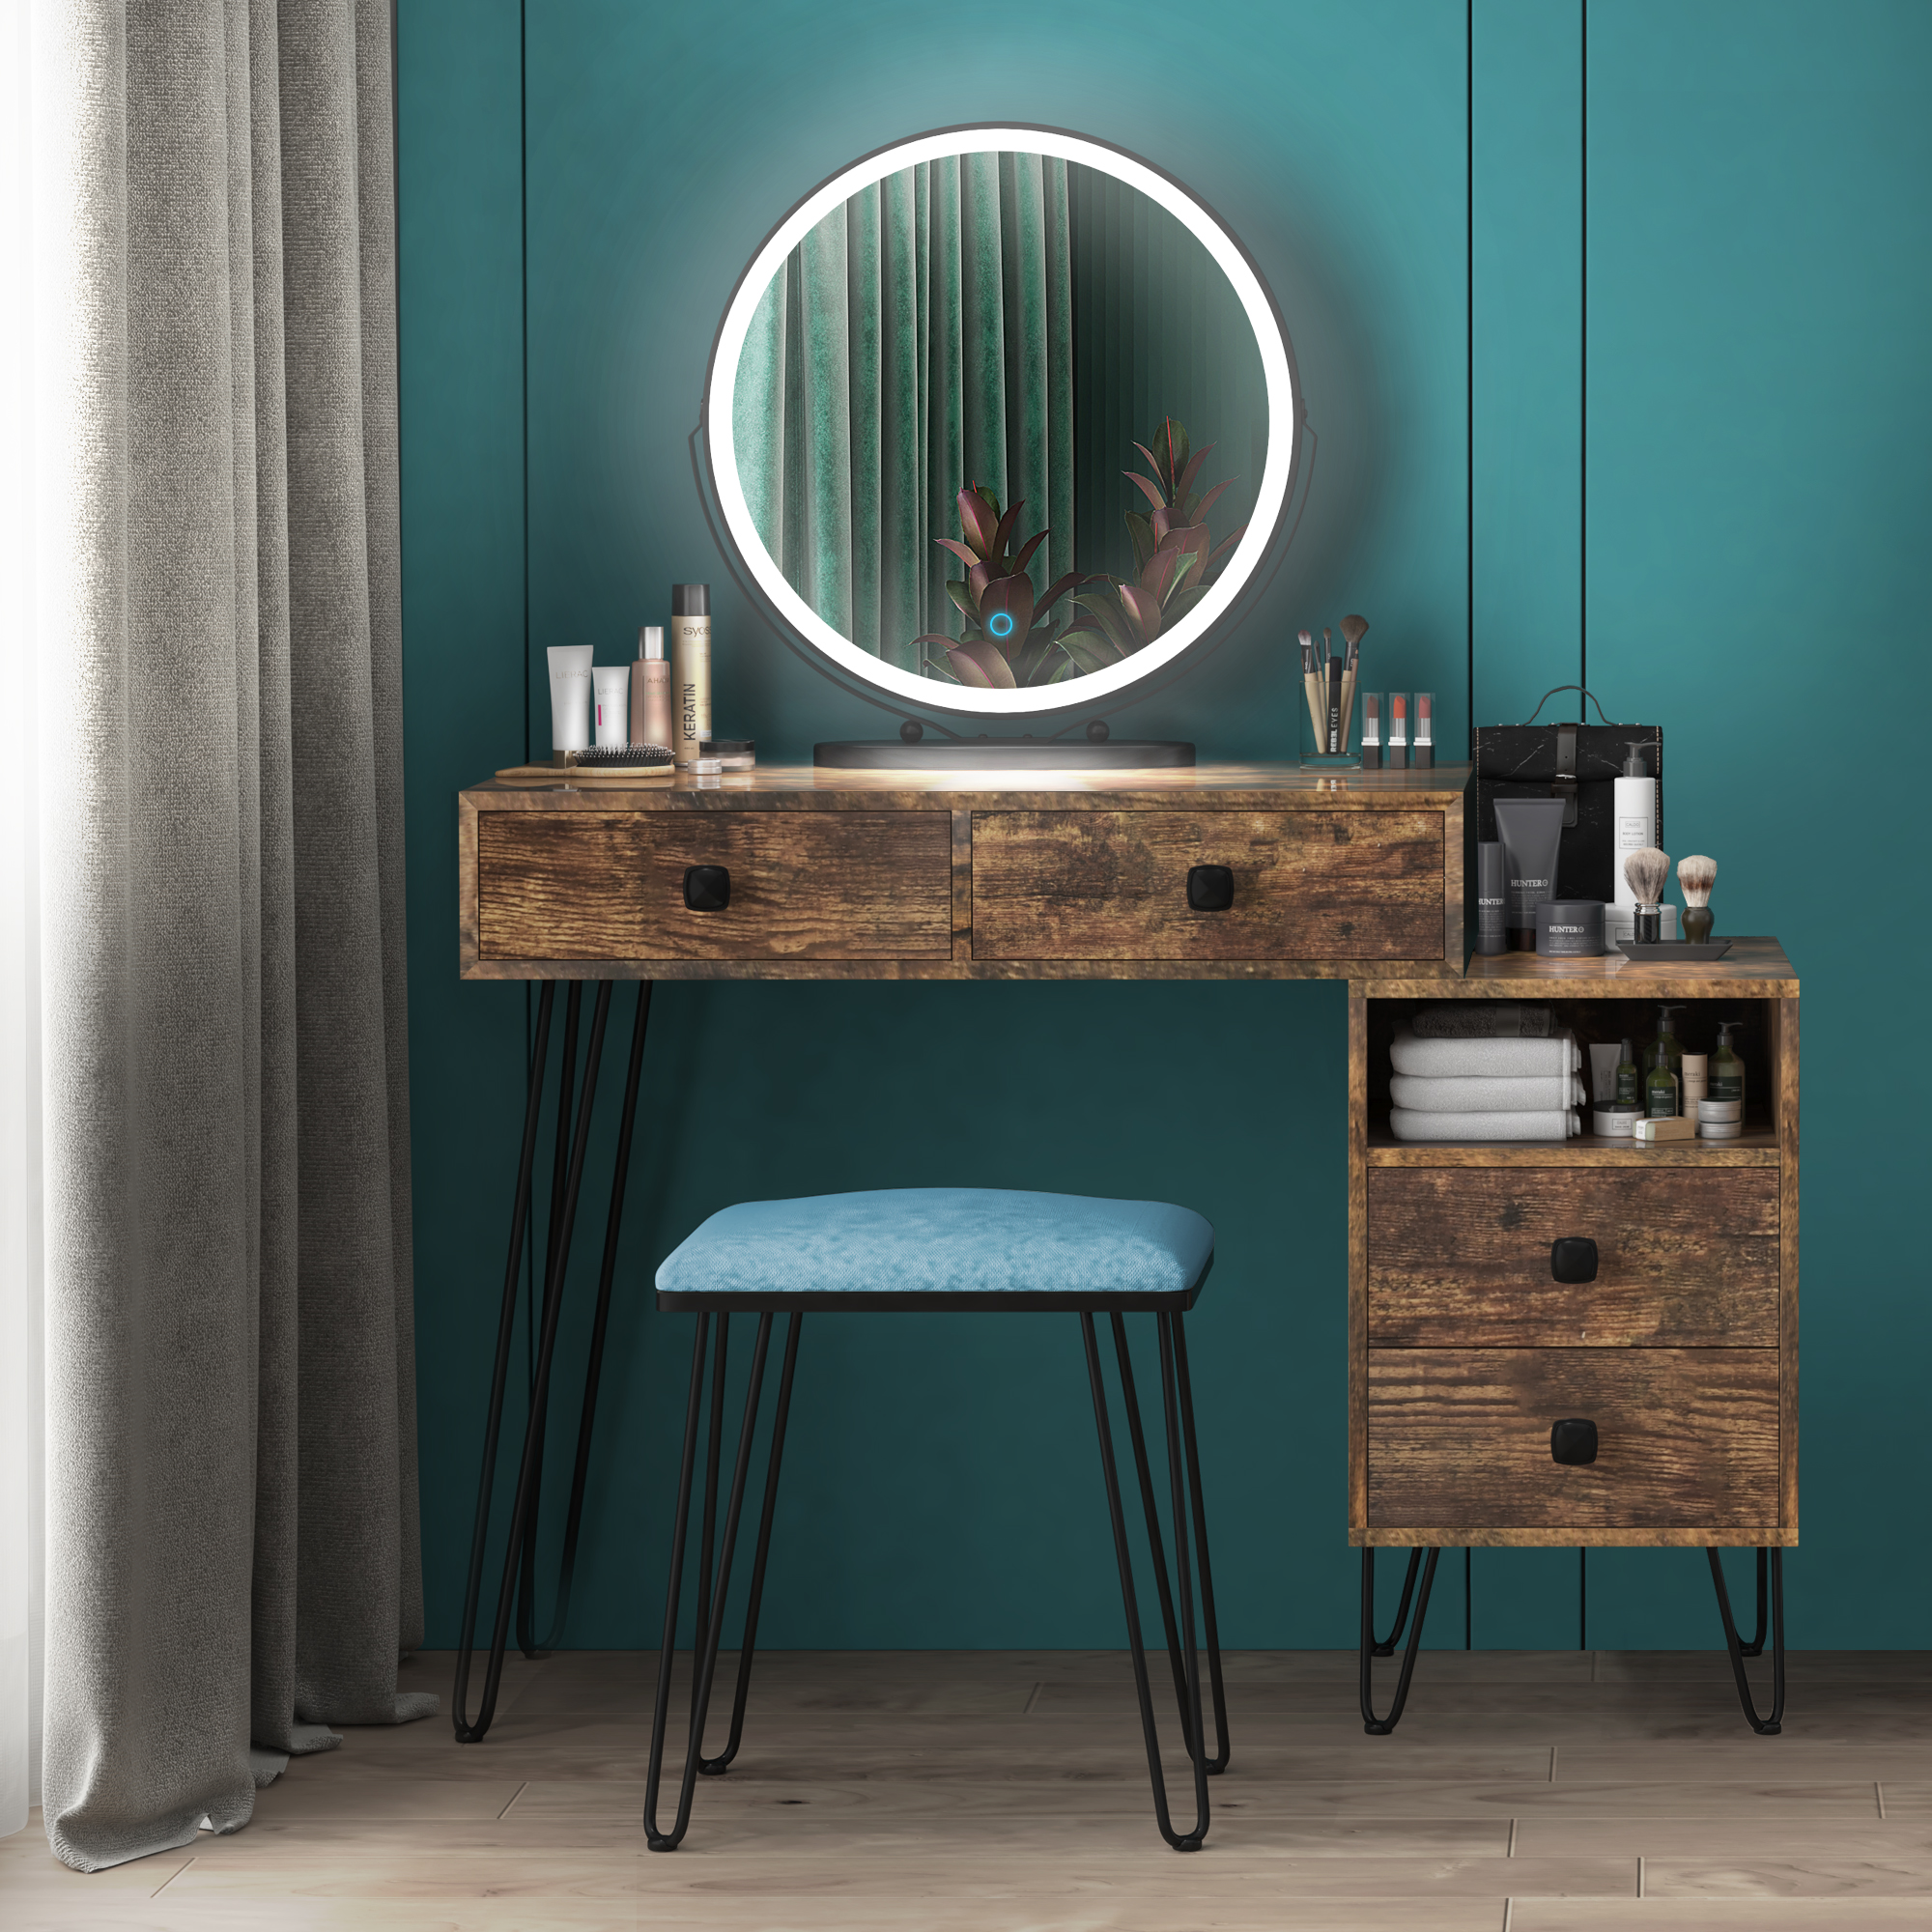 LVSOMT Makeup Vanity Desks with Touch Screen Dimming Light Mirror, Bedroom  Corner Dressing Table with Drawers, Vanities with Benches, Brown 